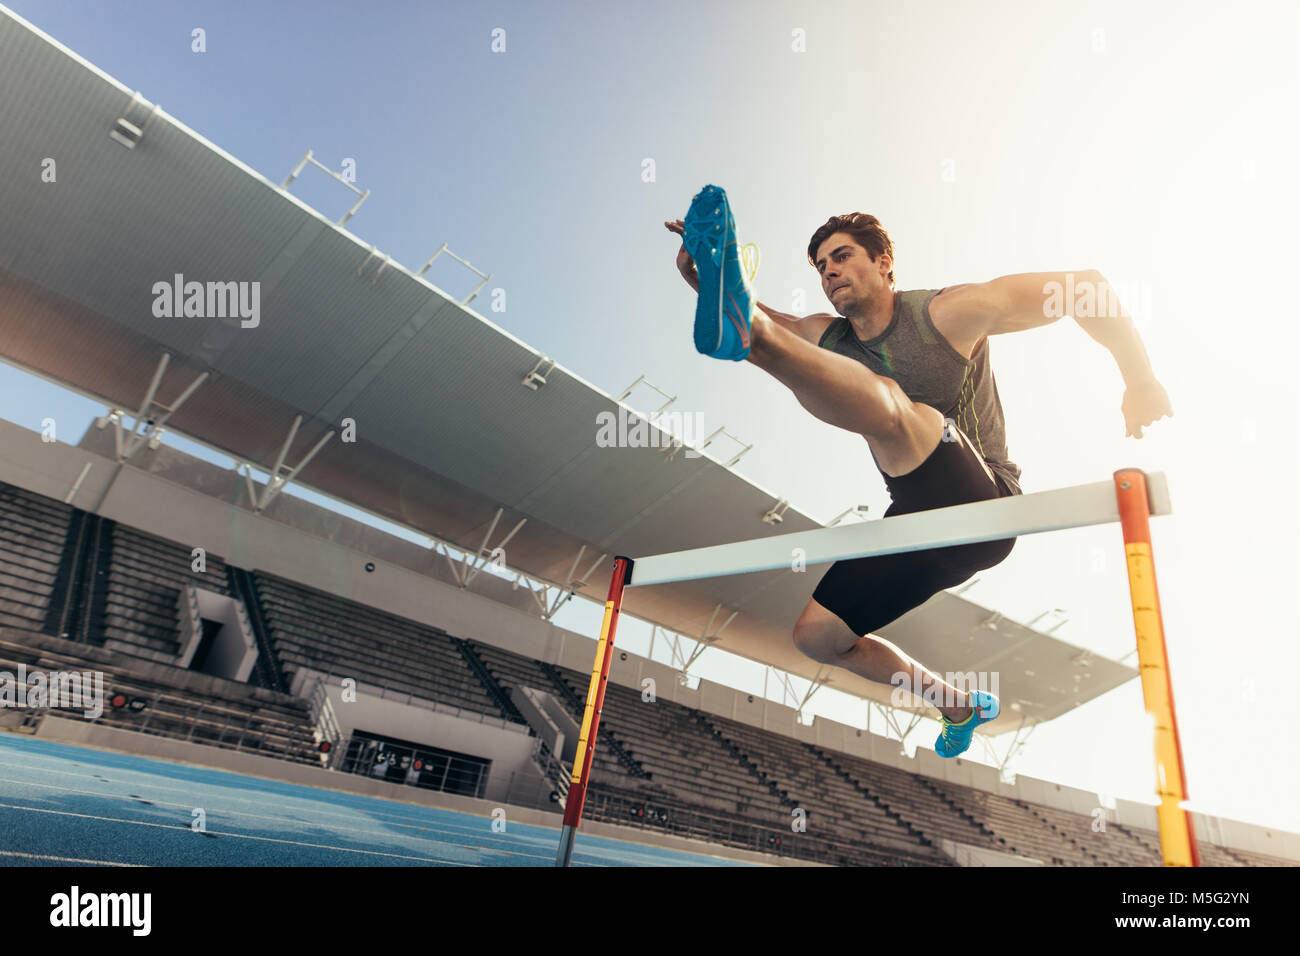 Close up of a runner jumping over an hurdle during track and field event. Athlete running a hurdle race in a stadium. Stock Photo